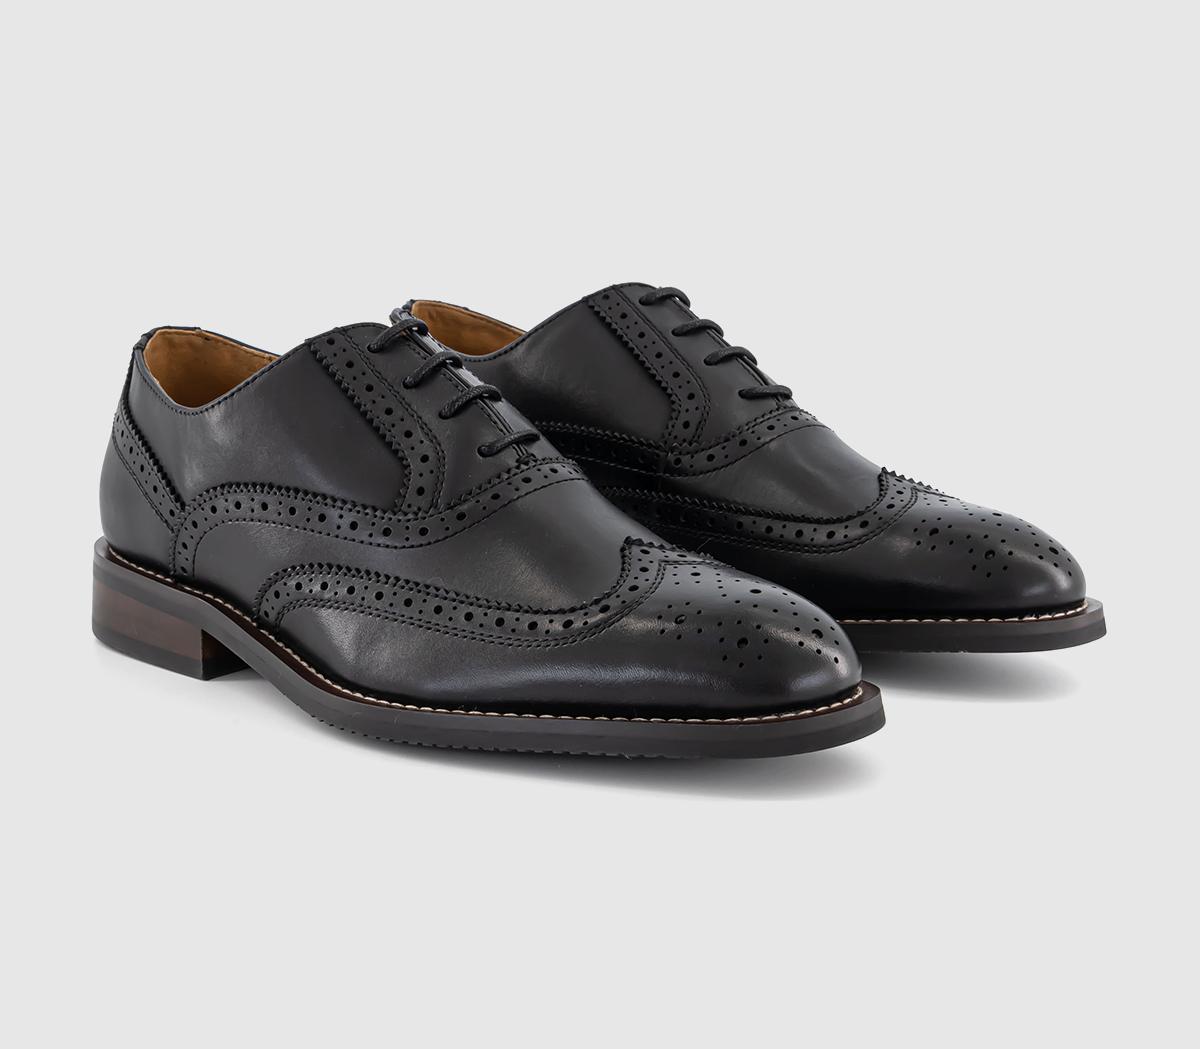 OFFICE Mens Mariner Wingcap Brogue Shoes Black Leather, 8